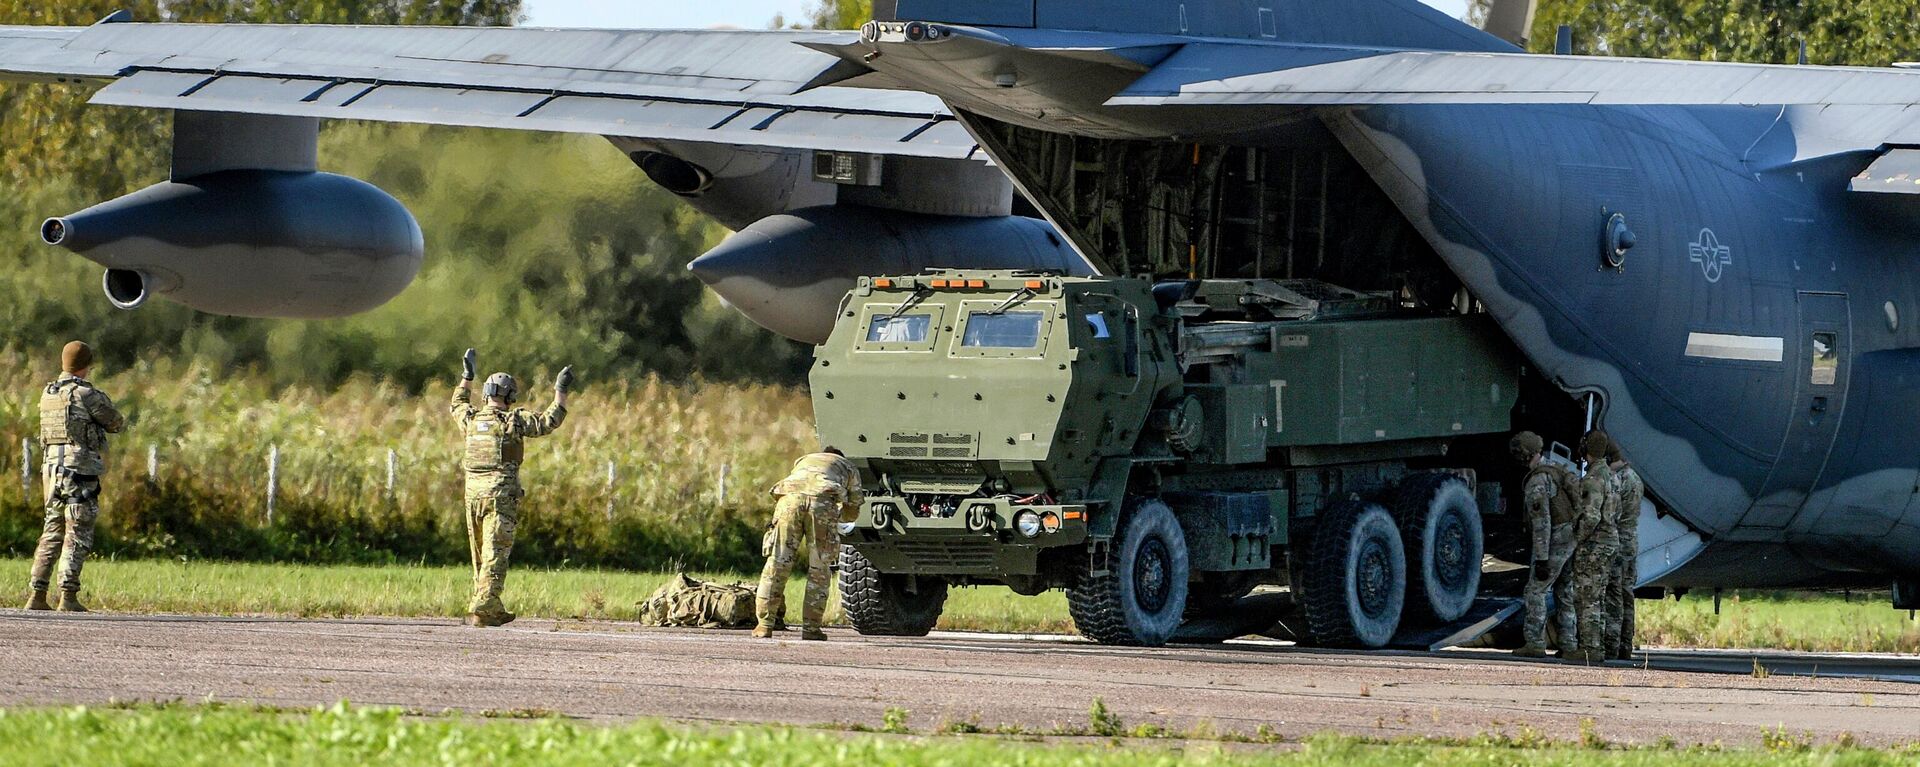 Soldiers load a High-Mobility Artillery Rocket System (HIMARS ) from a US Special Operations MC-130J aircraft during military exercises at Spilve Airport in Riga, Latvia, on Sept. 26, 2022. - Sputnik International, 1920, 24.02.2023